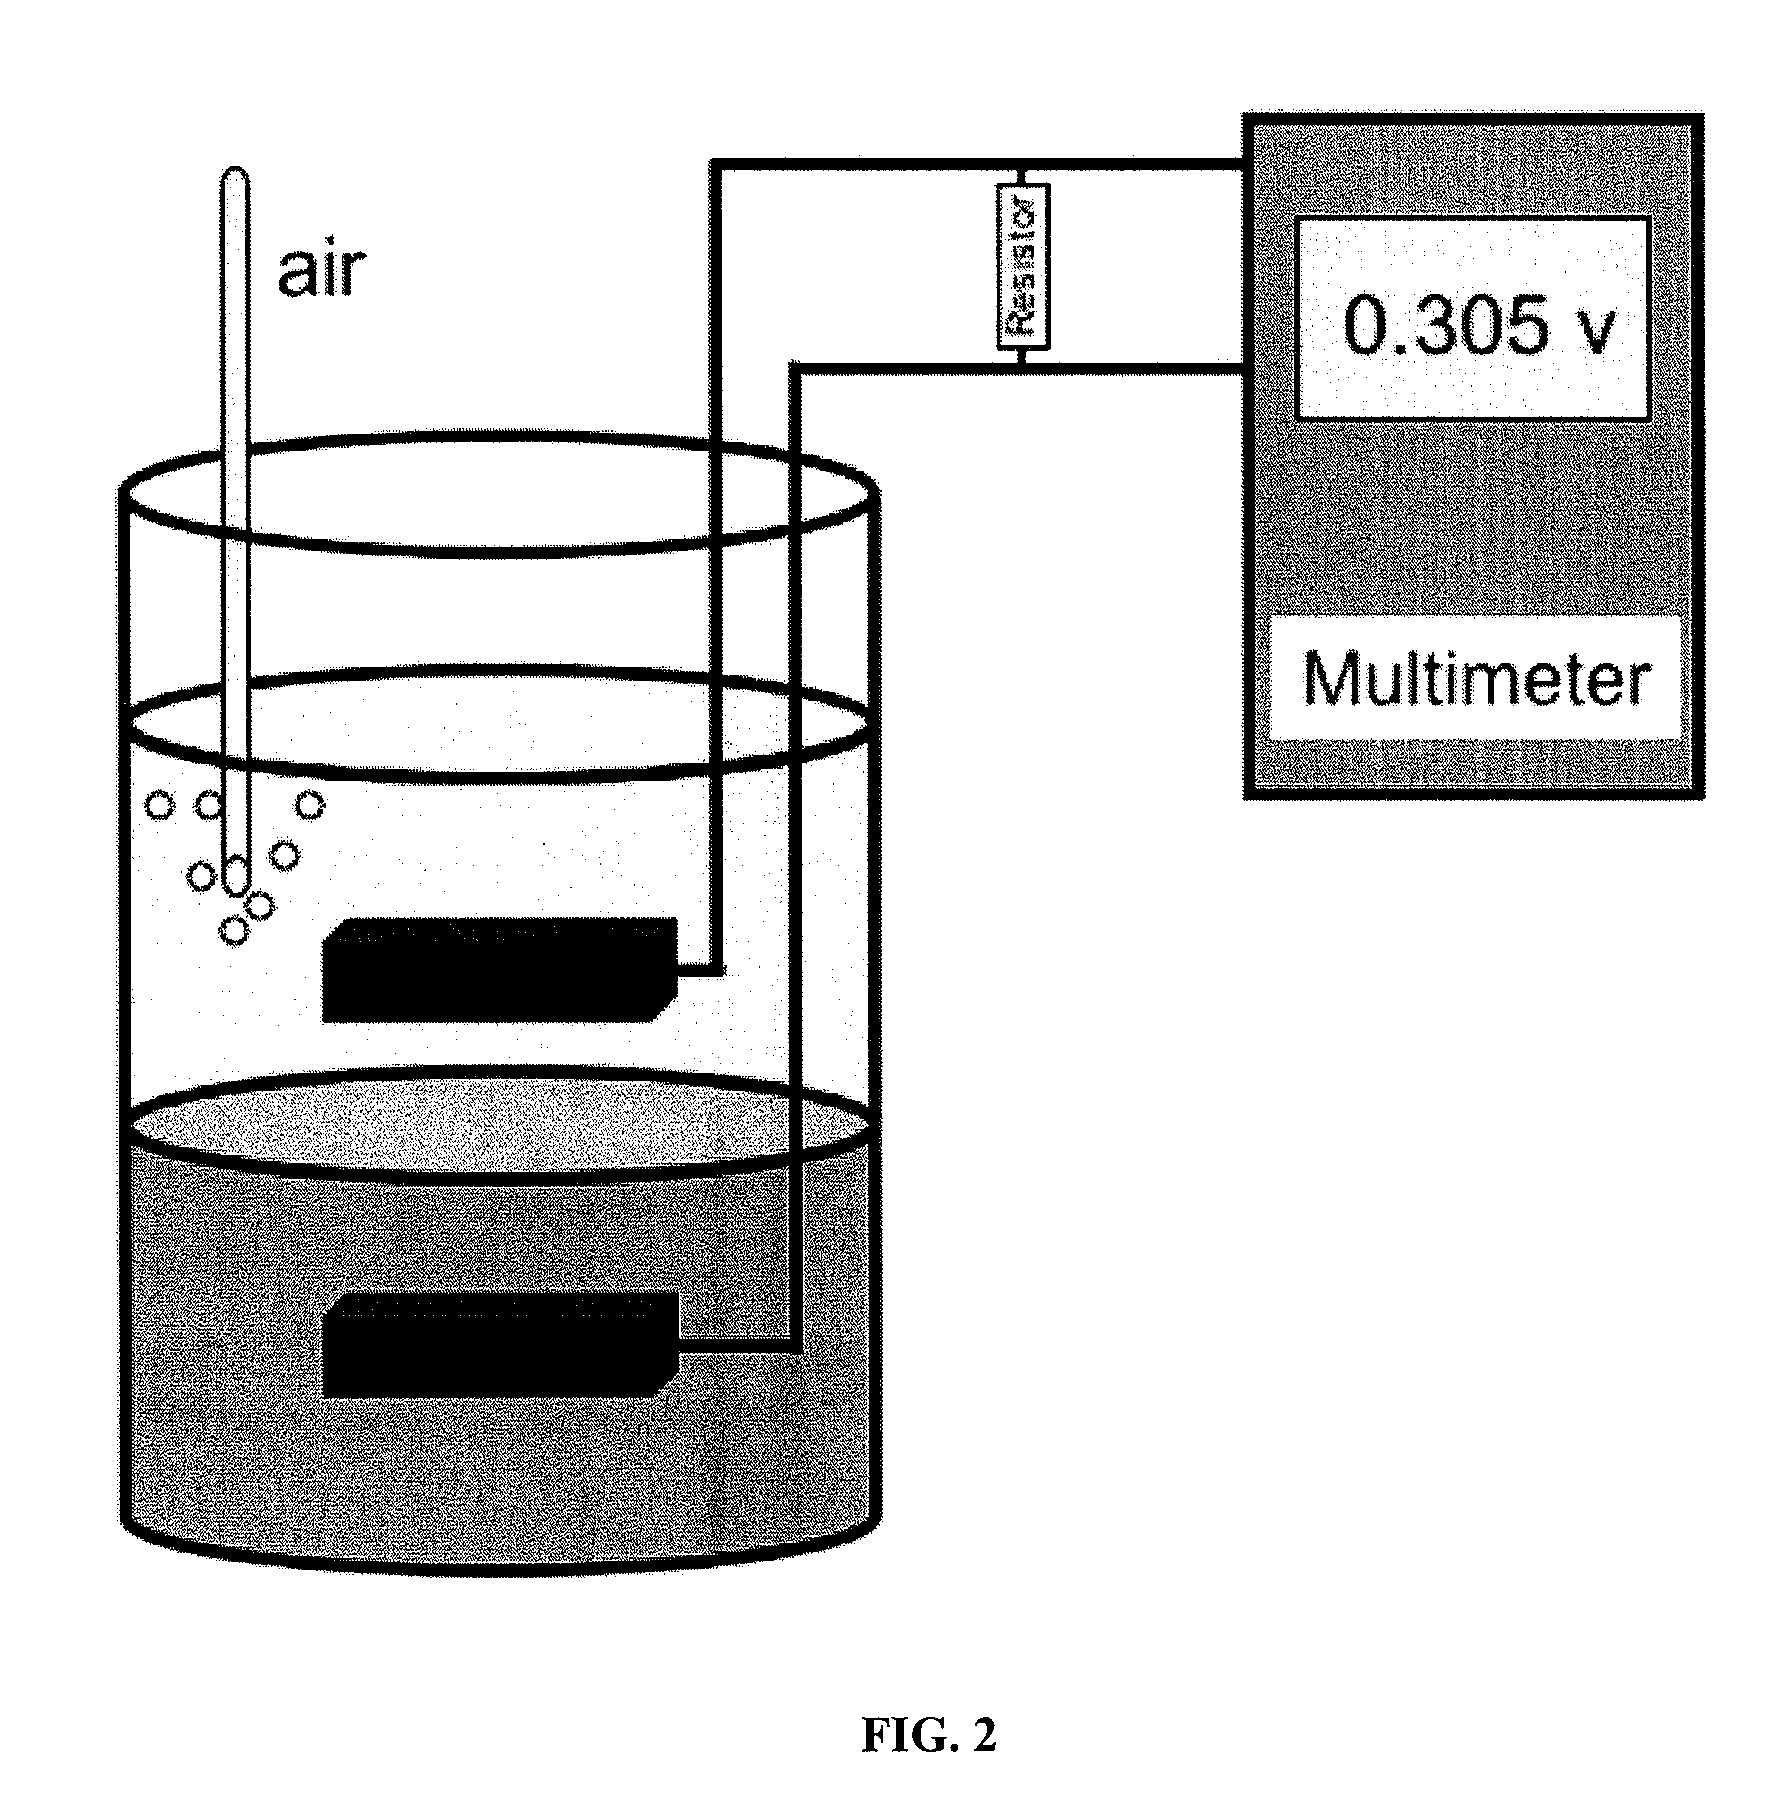 Apparatus and methods for the production of ethanol, hydrogen and electricity